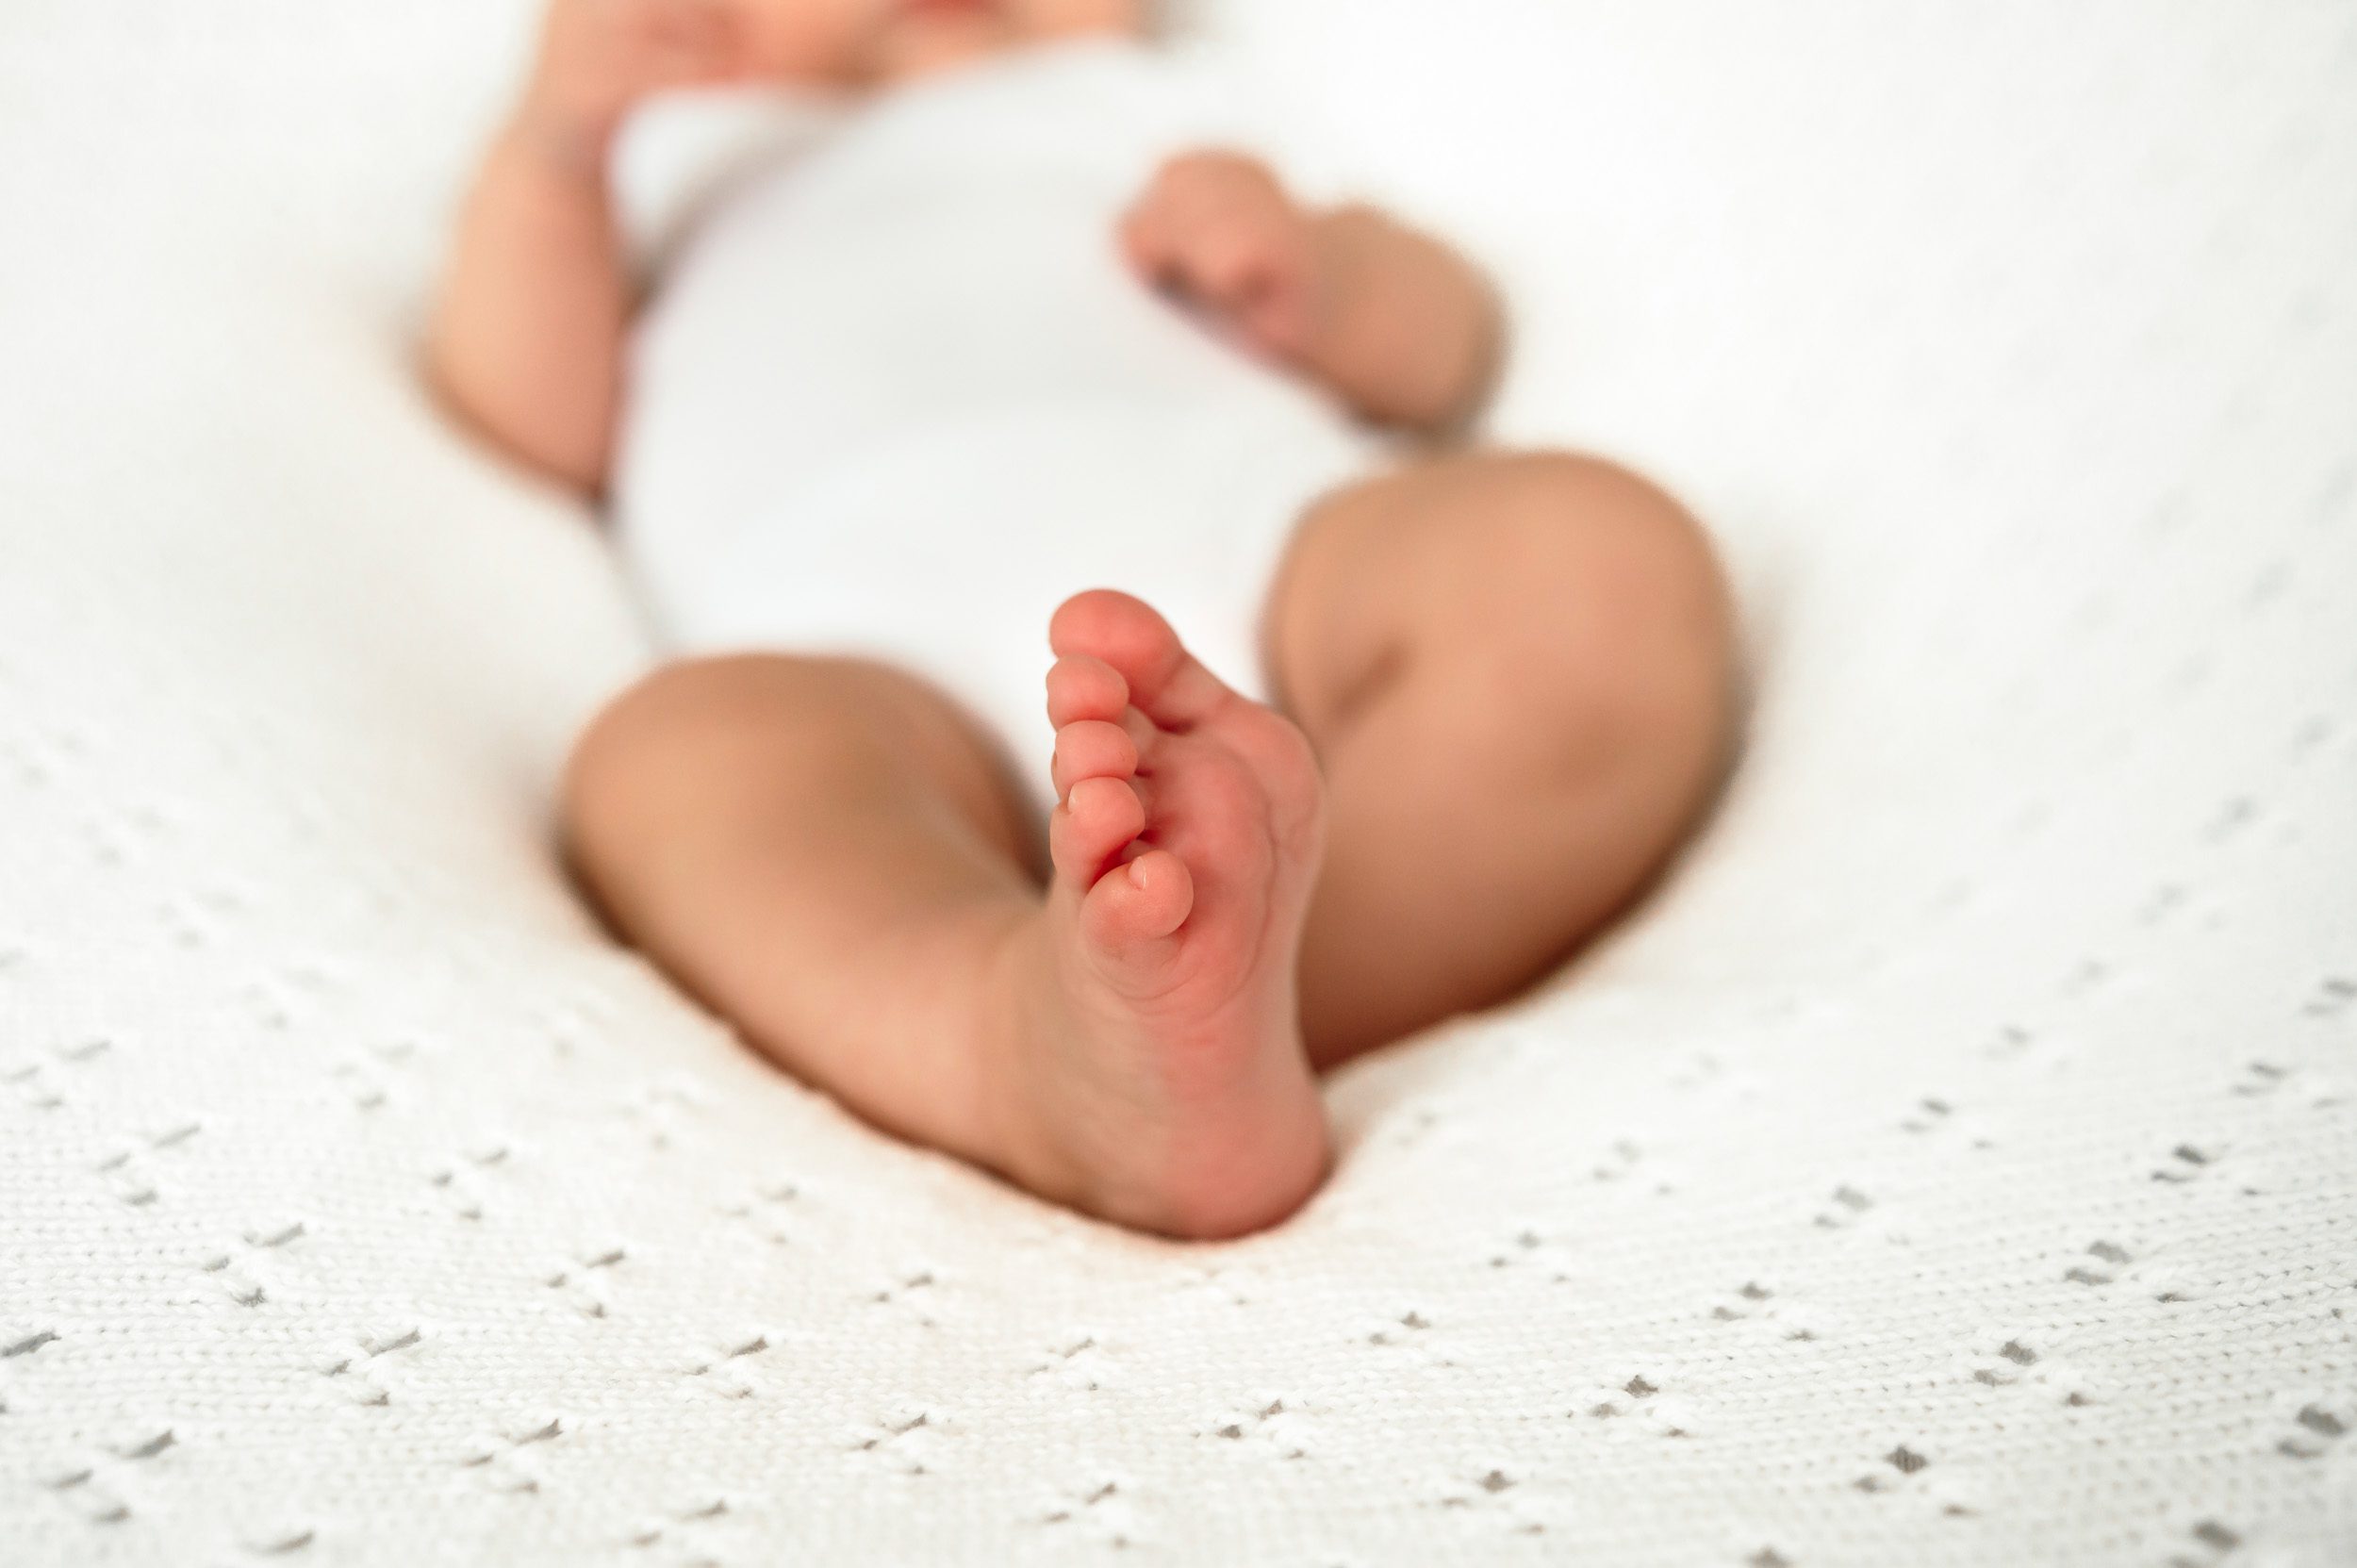 Close-up detail shot of newborn baby girl's toes during a home newborn photoshoot